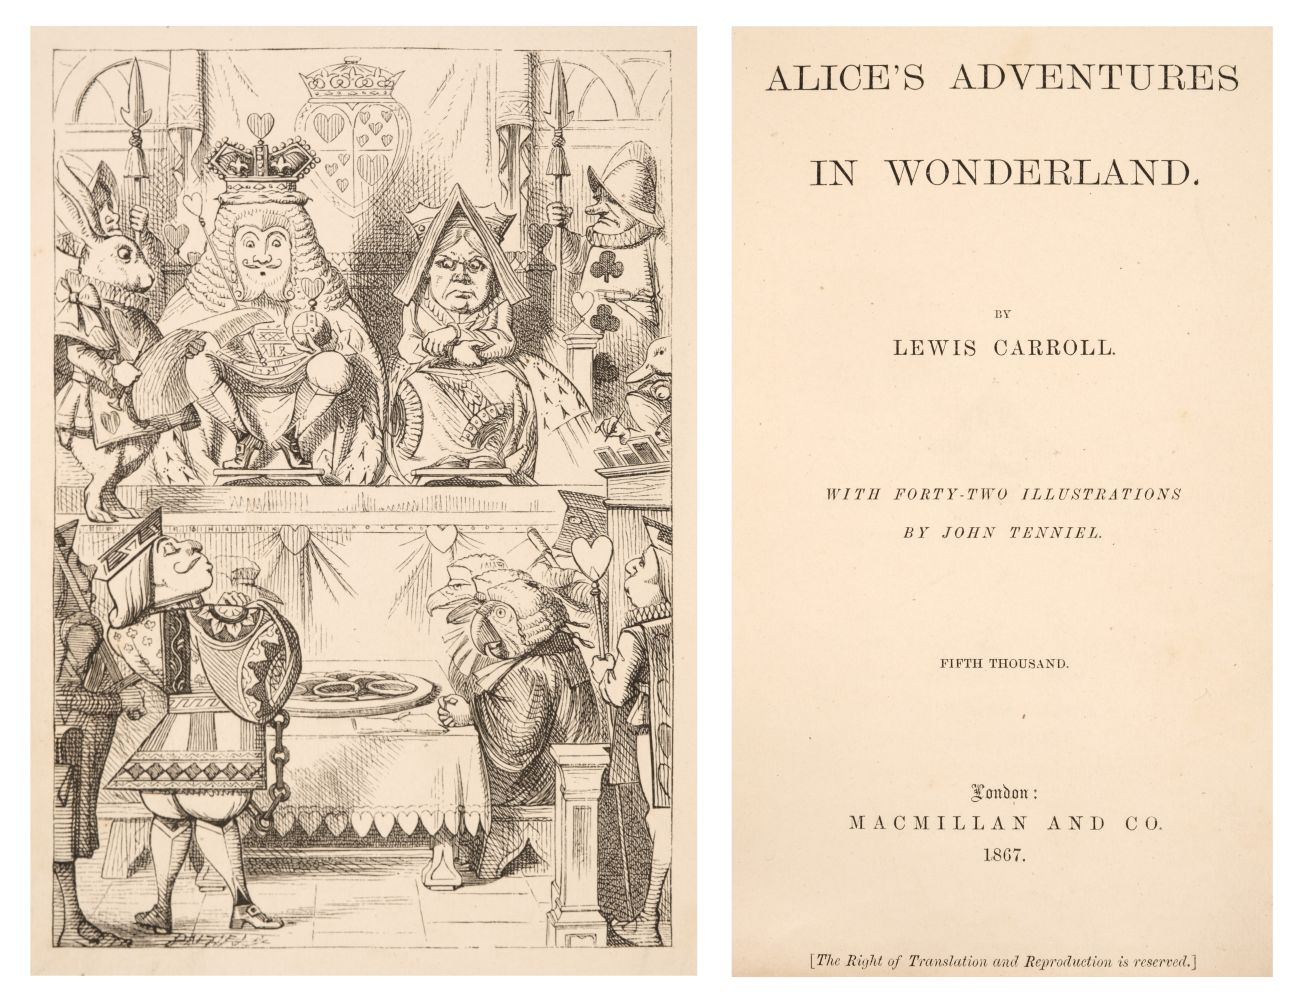 Carroll (Lewis). Alice's Adventures in Wonderland, fifth thousand, London: Macmillan and Co, 1867